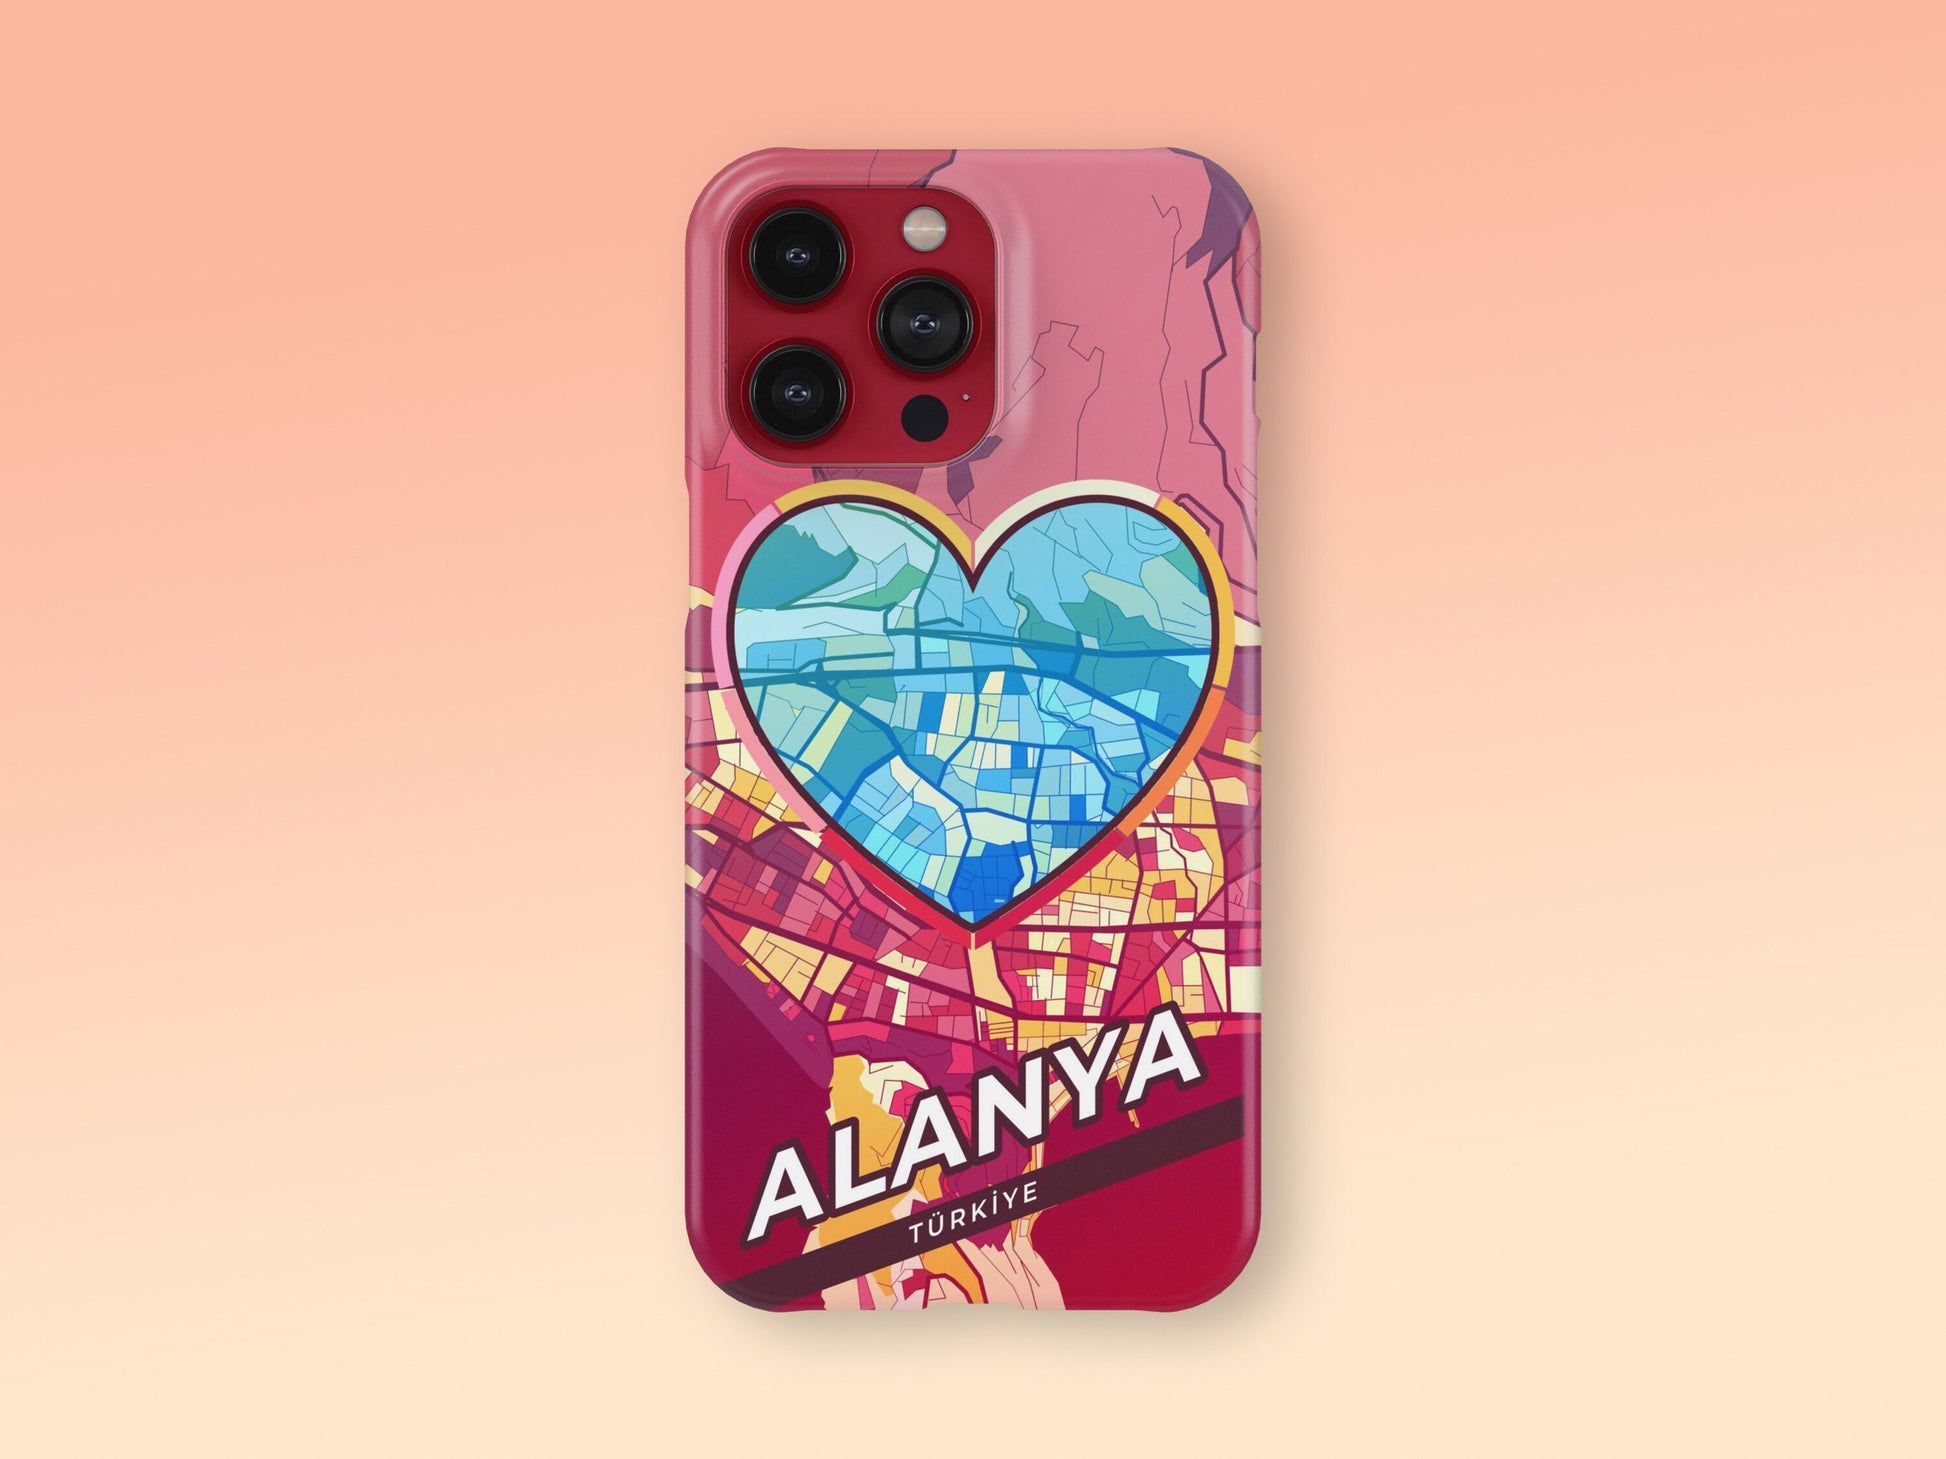 Alanya Turkey slim phone case with colorful icon. Birthday, wedding or housewarming gift. Couple match cases. 2